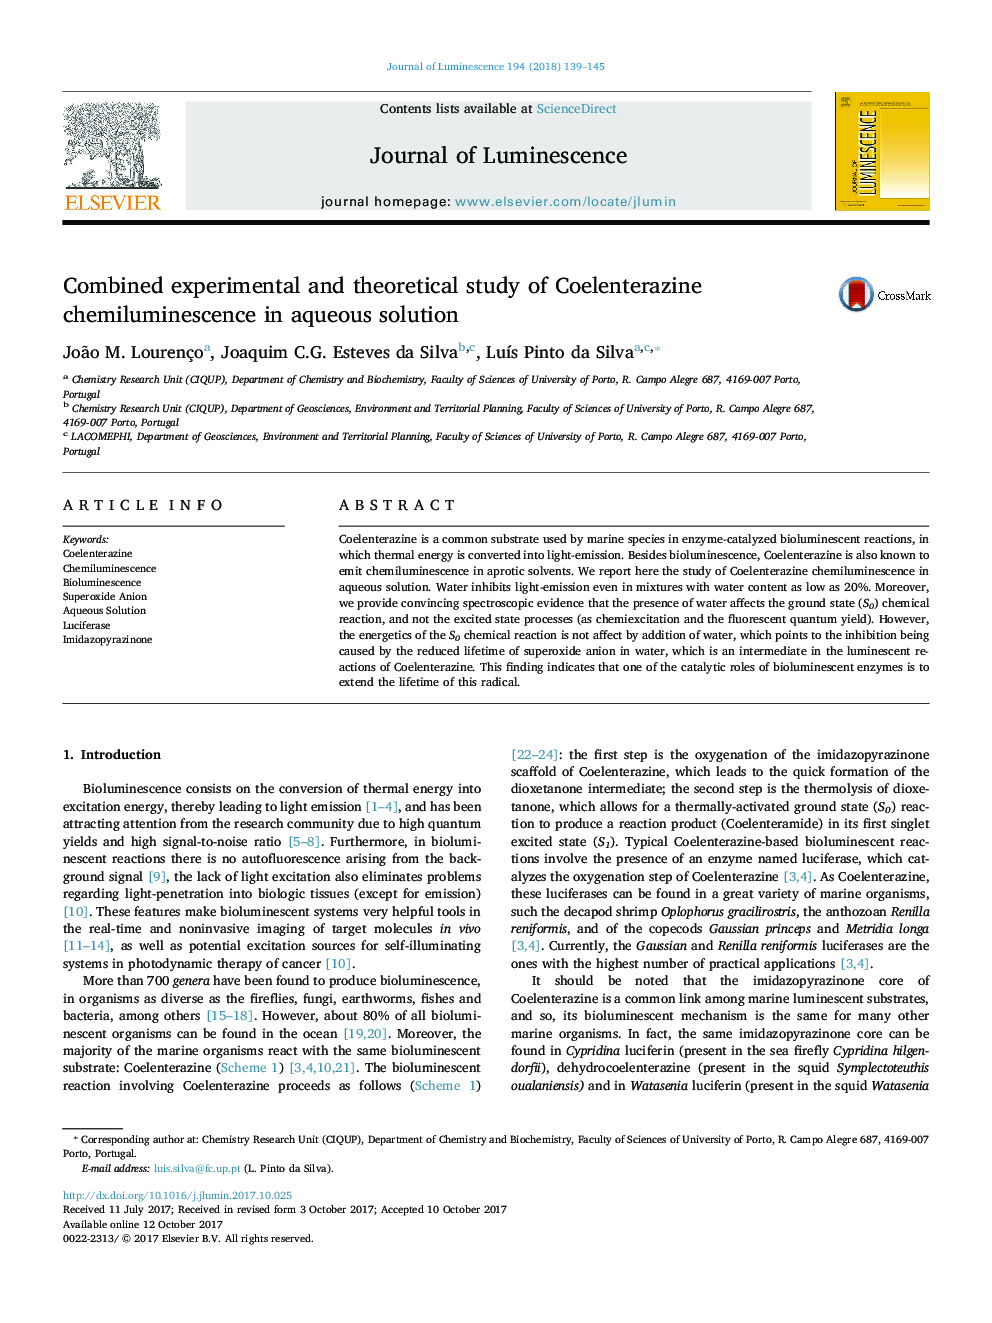 Combined experimental and theoretical study of Coelenterazine chemiluminescence in aqueous solution